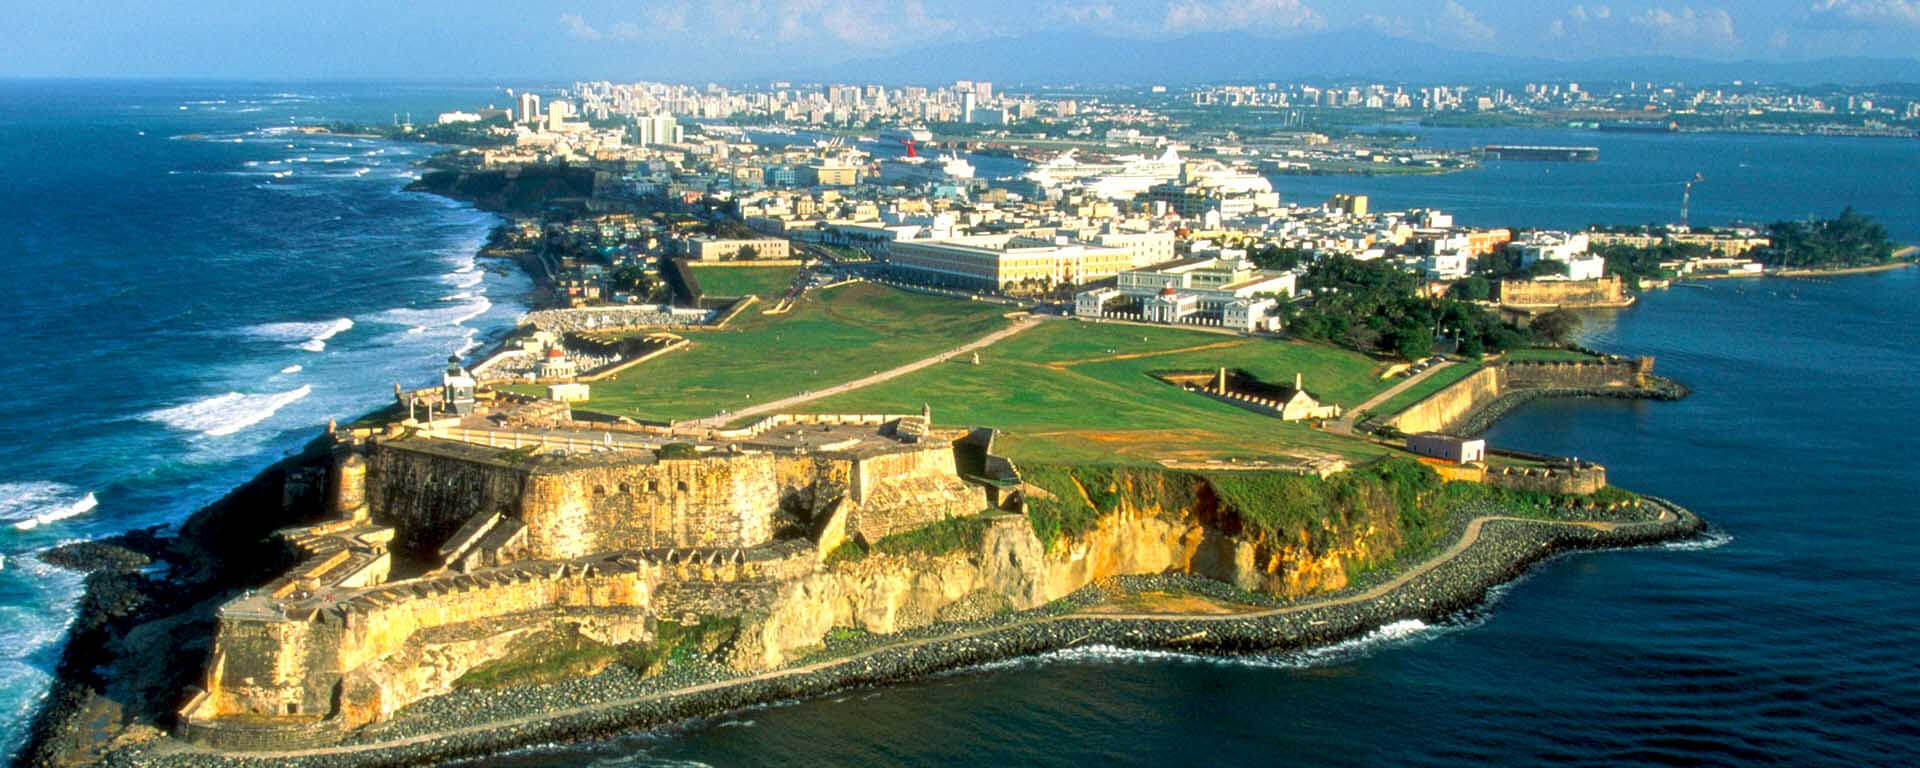 Puerto Rico Tour Packages